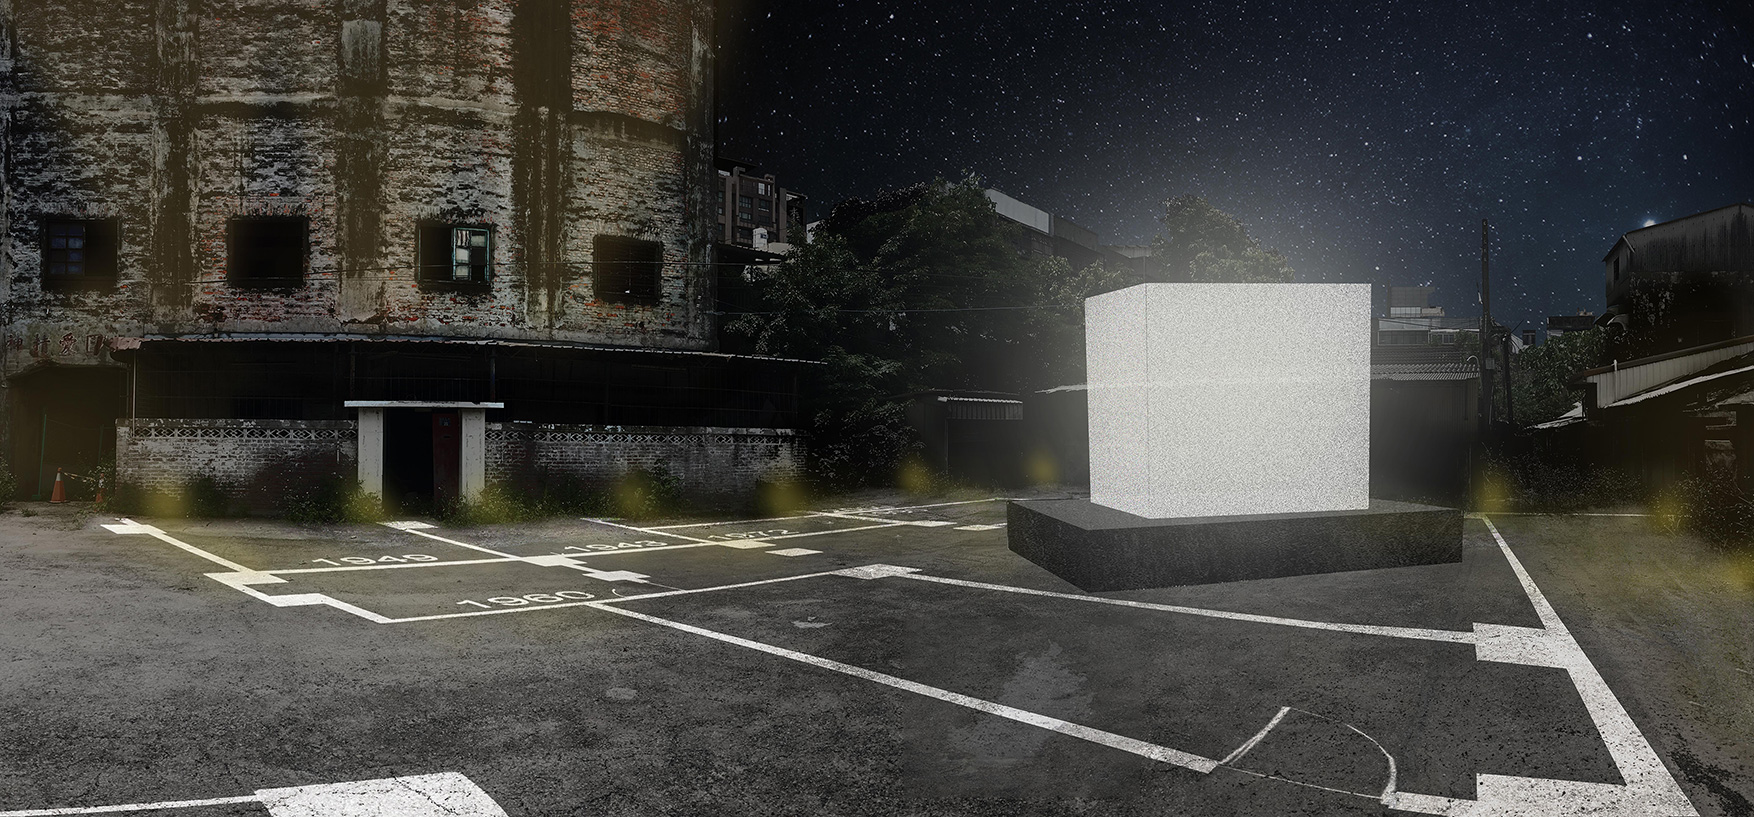 Rendering of the cube-shaped projection object on stage.